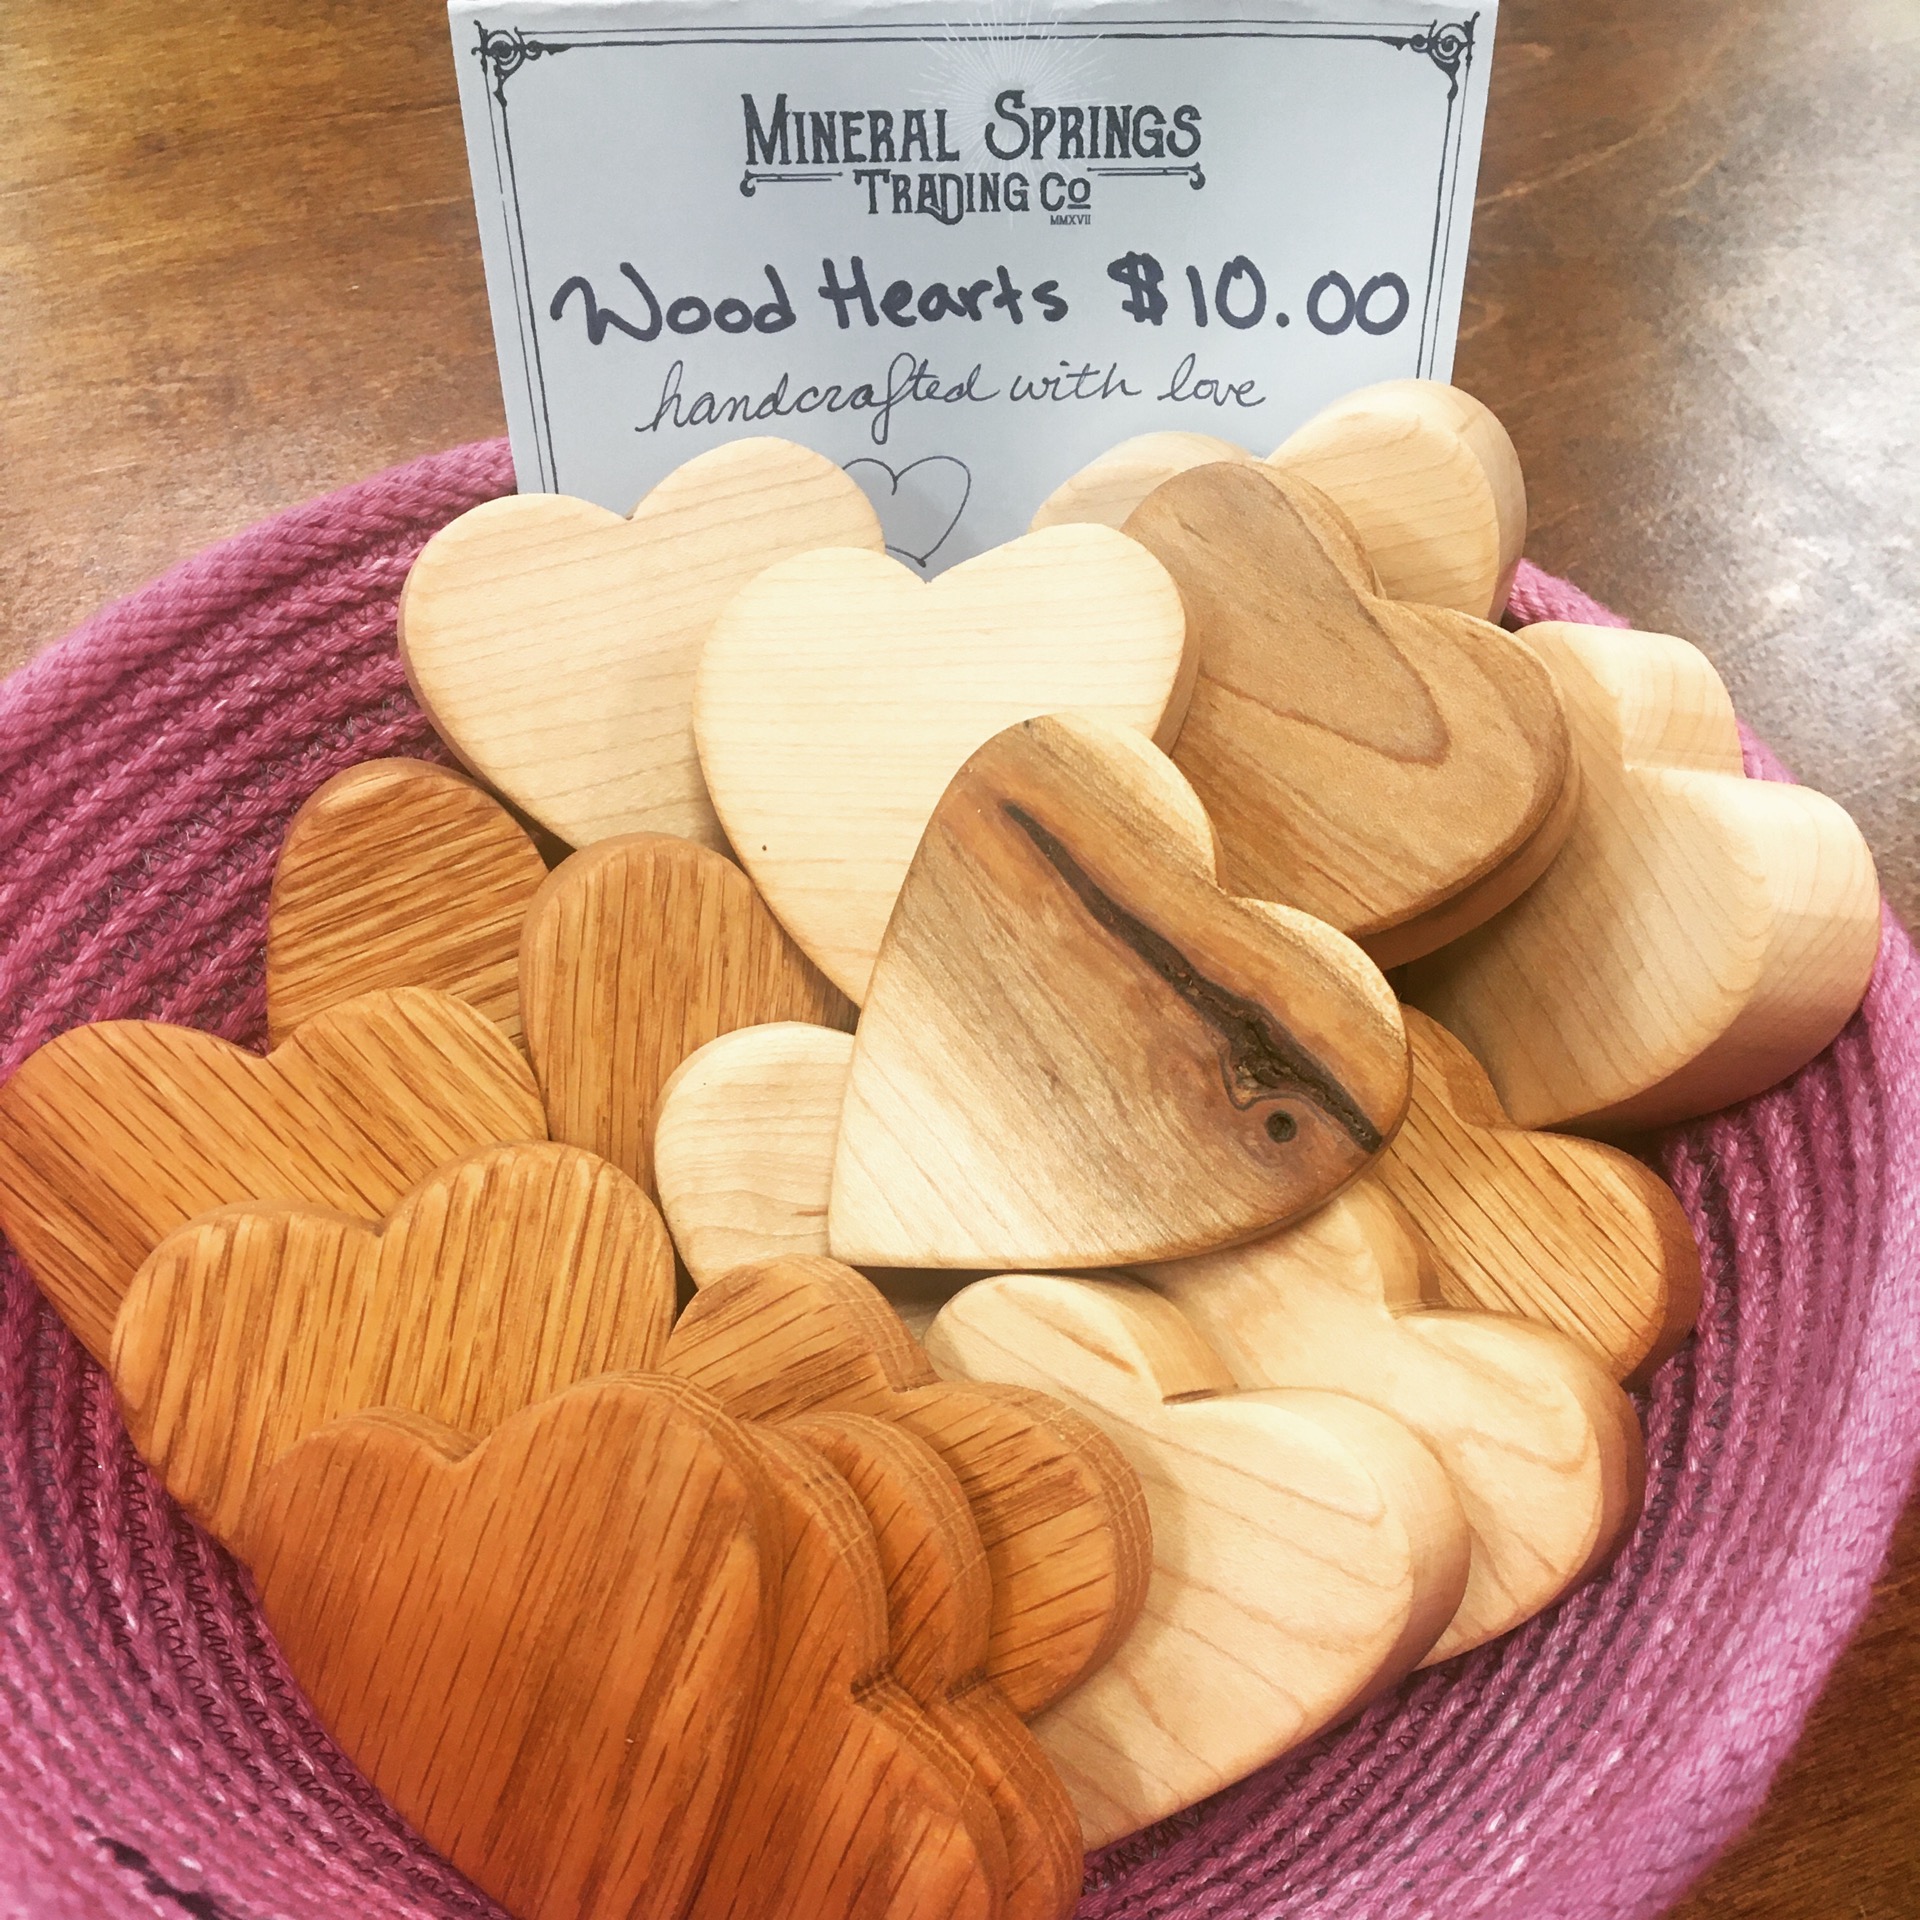 Wood Heart - Mineral Springs Trading Co.